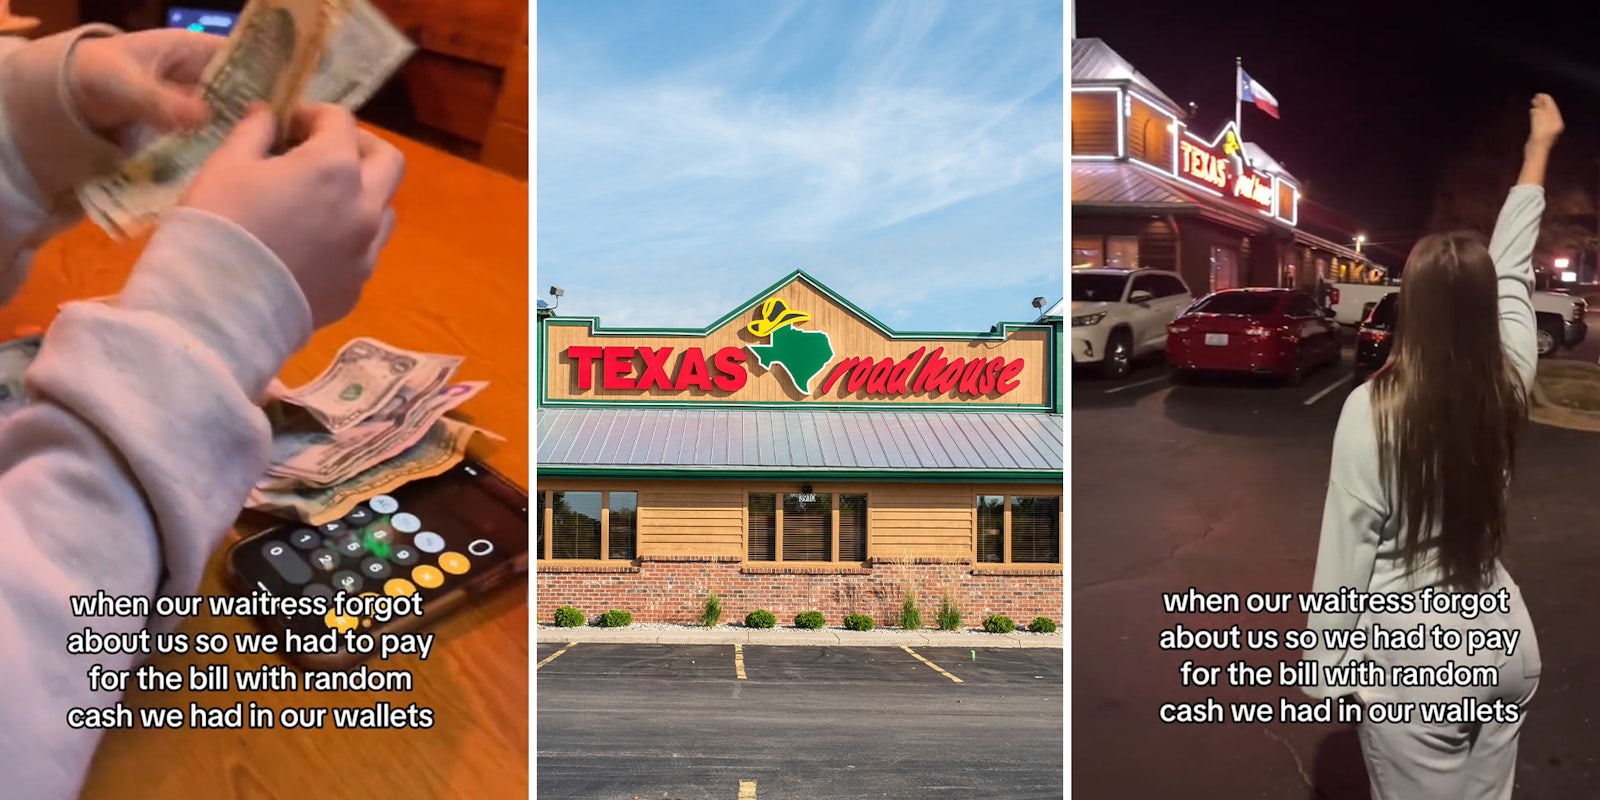 Texas Roadhouse worker forgets to bring customers the bill. They have to scramble to find cash so they can leave